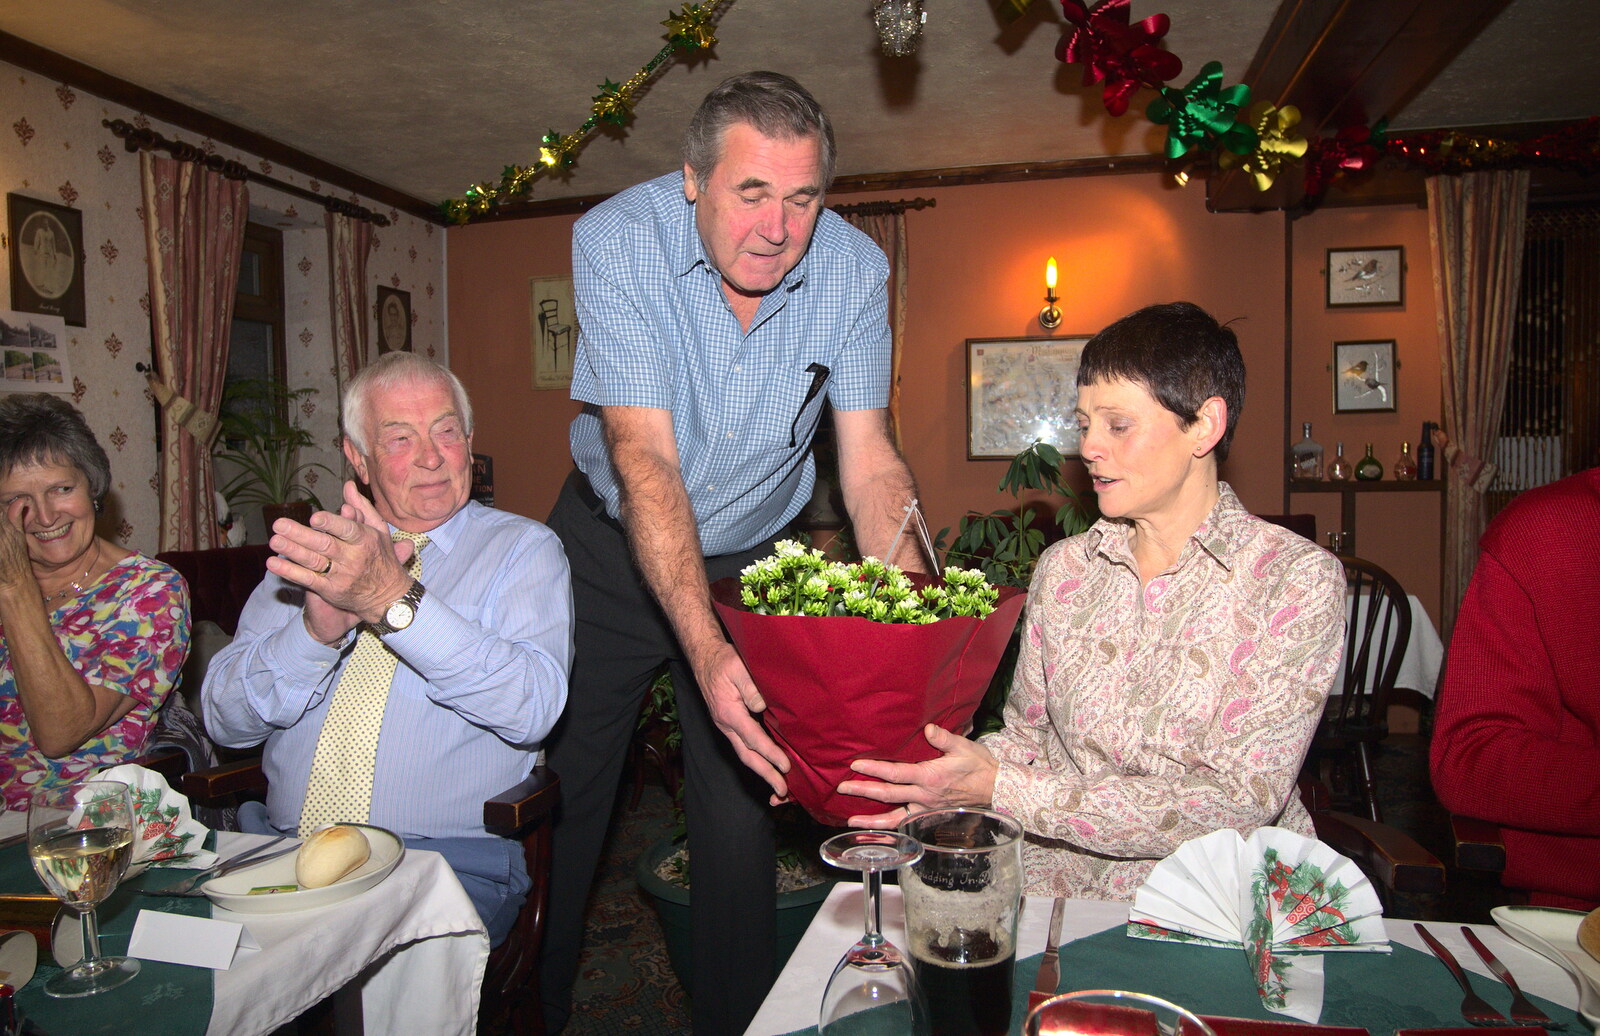 Alan gives Pippa some flowers from The BSCC Christmas Dinner, Brome, Suffolk - 7th December 2013